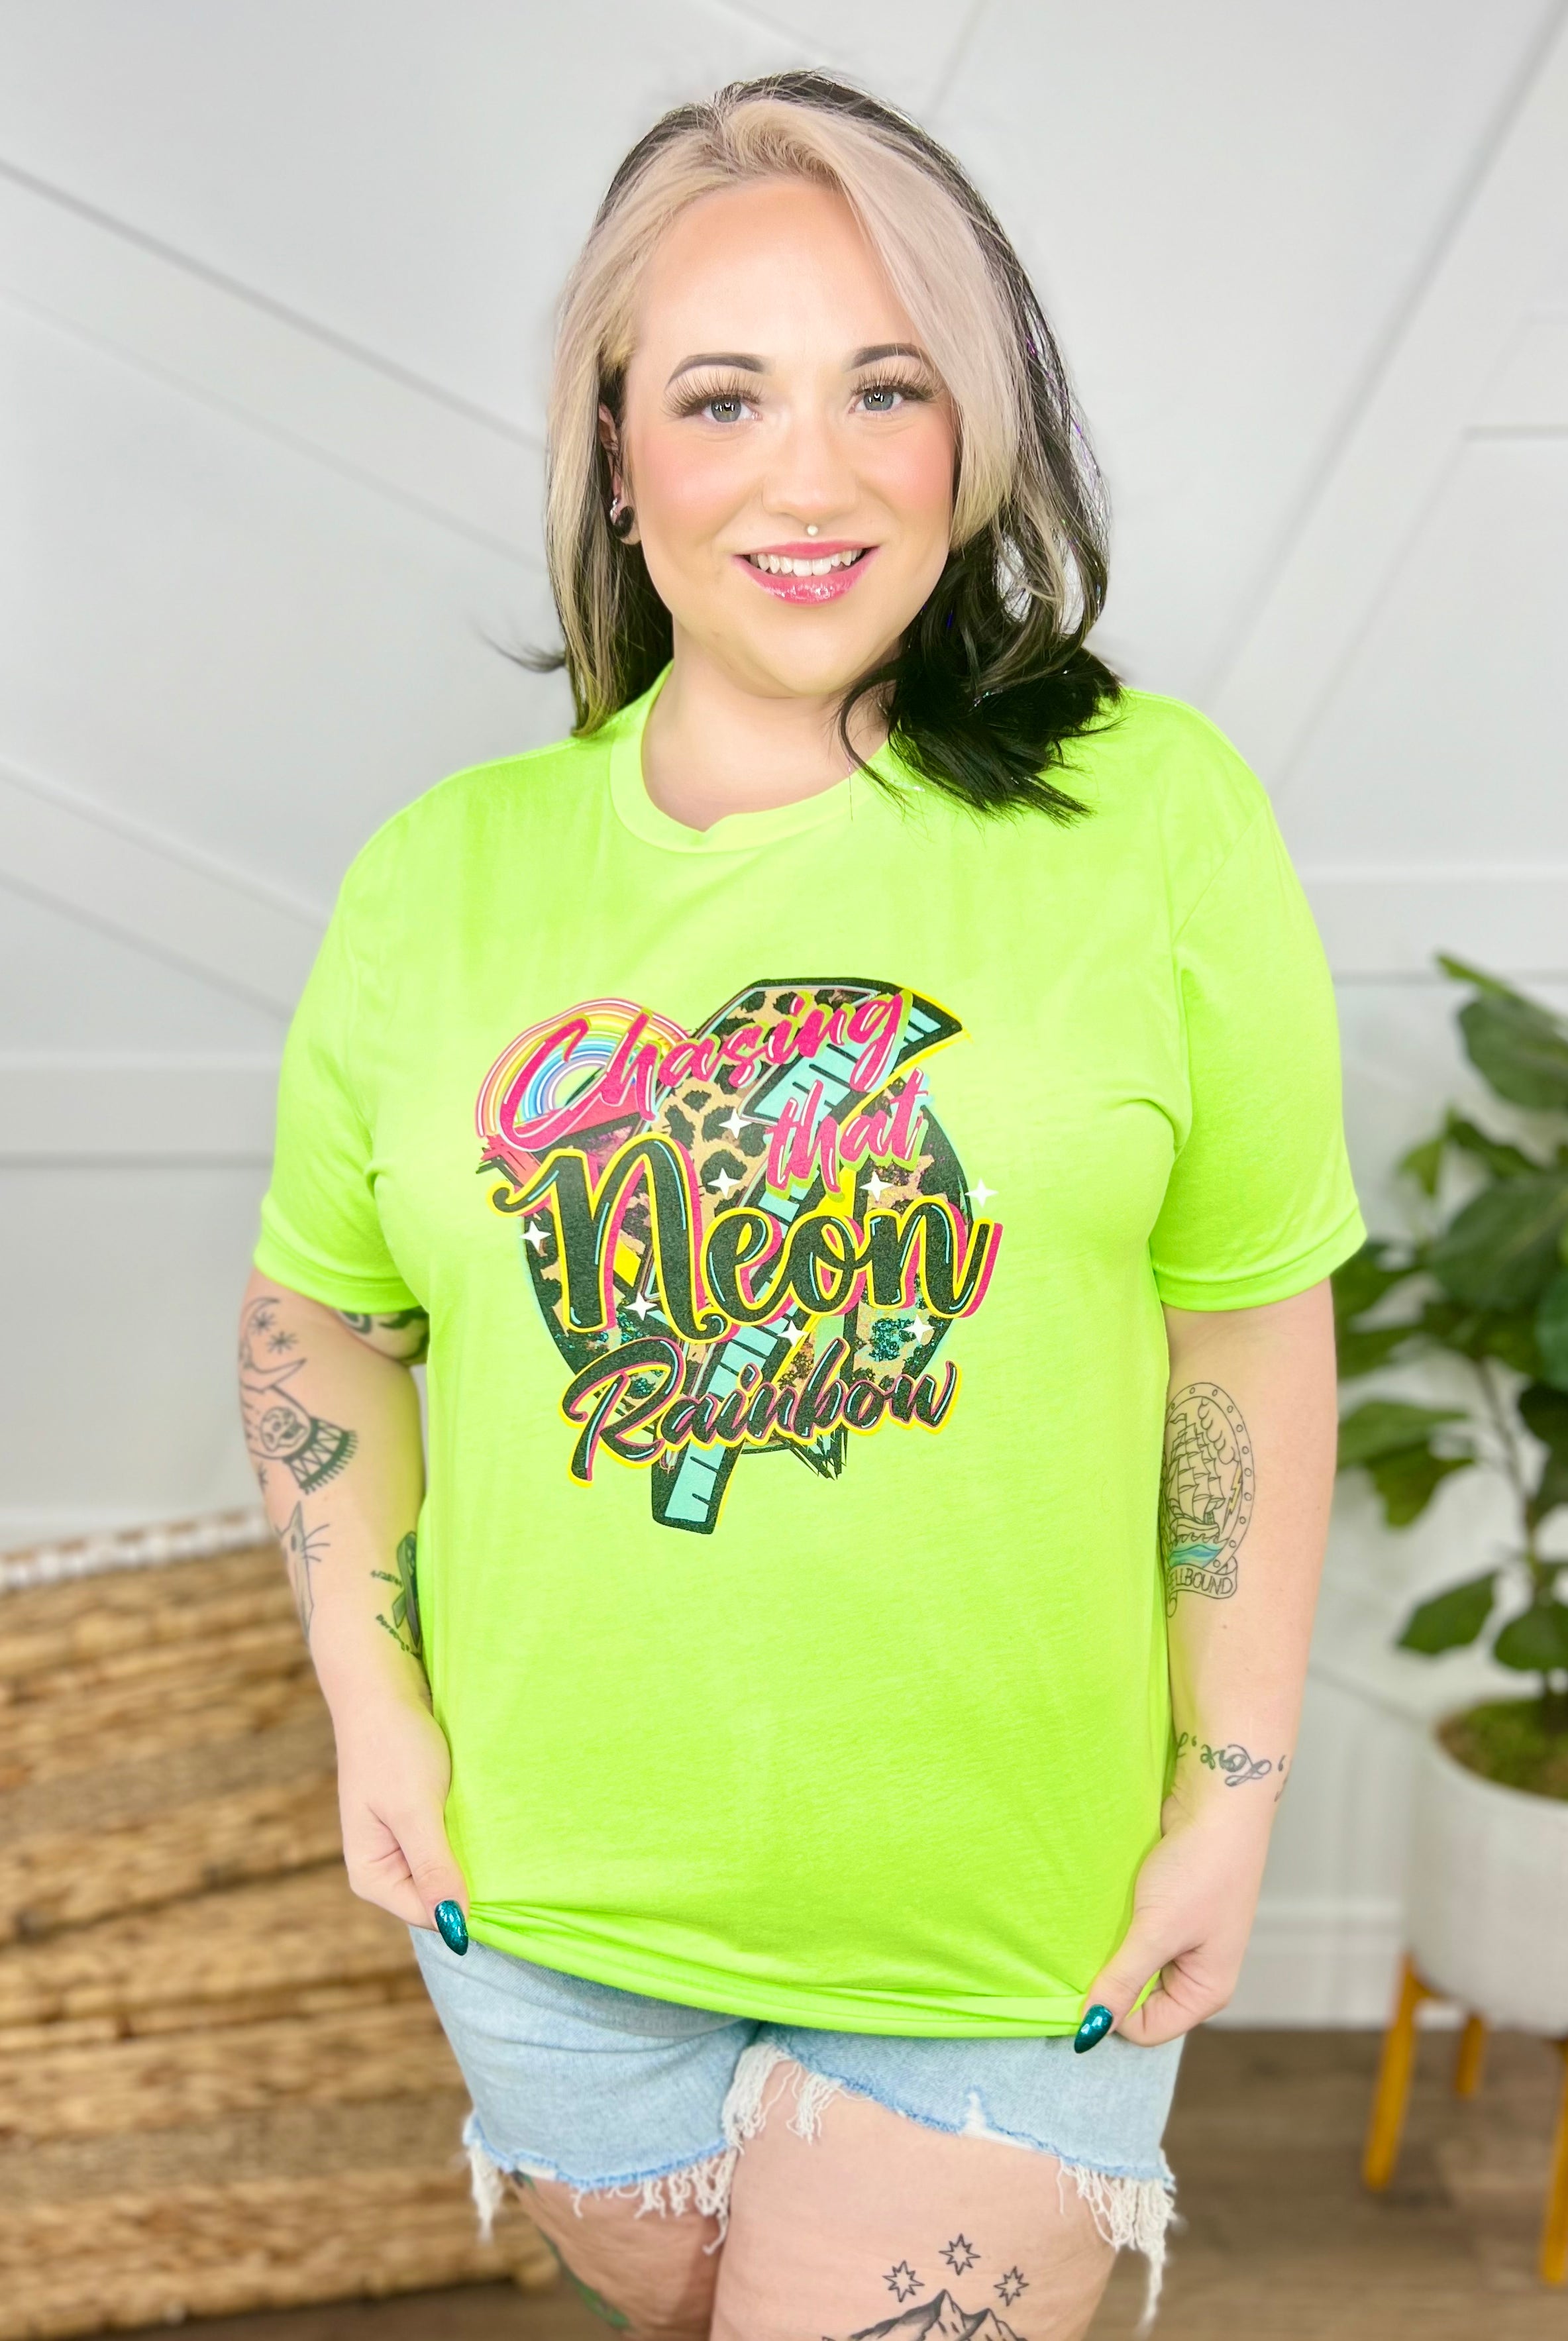 Chasing That Neon Rainbow Graphic Tee-110 Short Sleeve Top-Heathered Boho-Heathered Boho Boutique, Women's Fashion and Accessories in Palmetto, FL